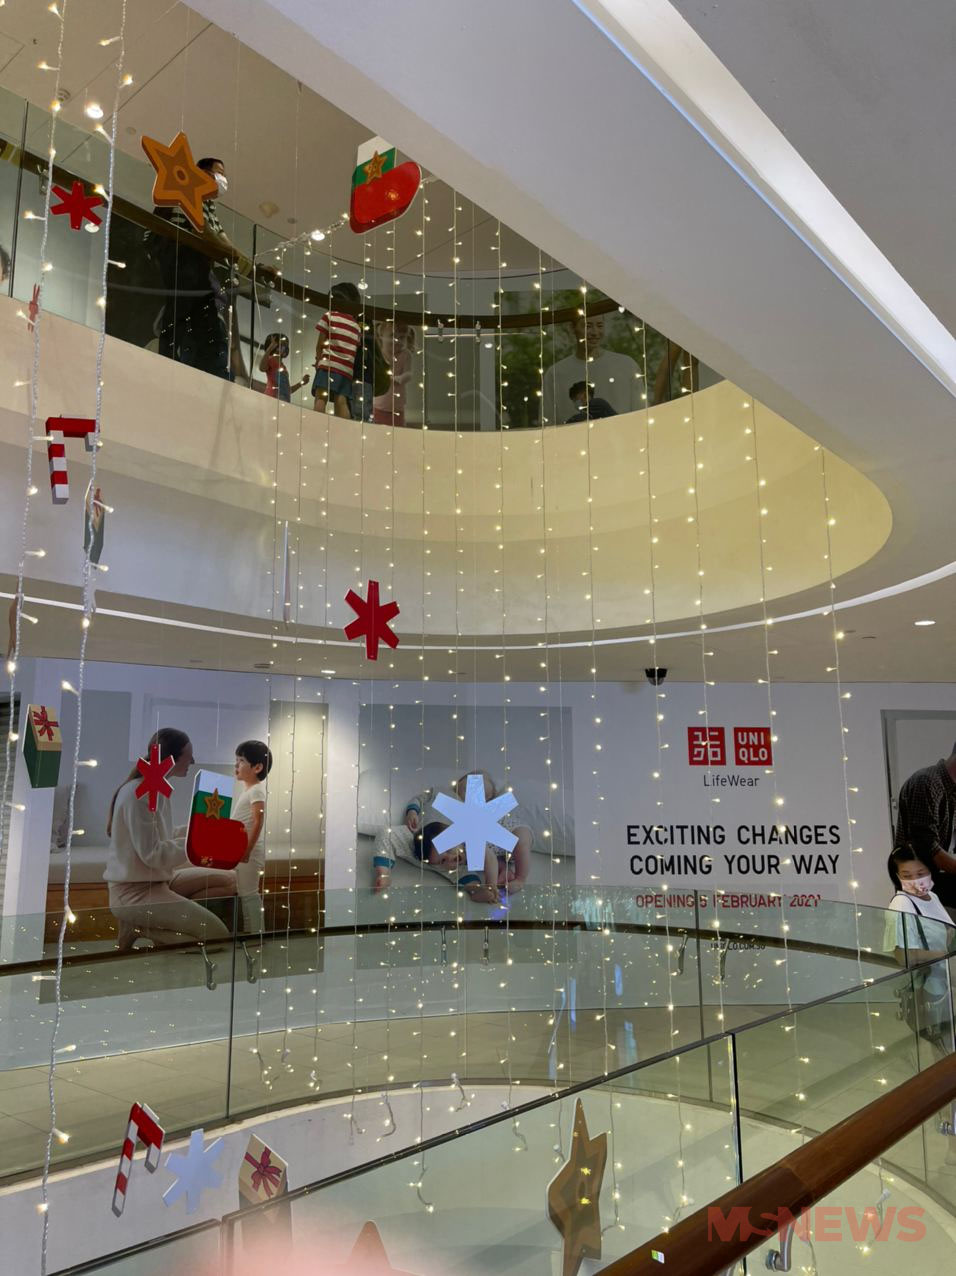 Uniqlo Tampines Mall Opens On 5 Feb Has 2 Floors So Theres More Space To  Shop For CNY Clothes